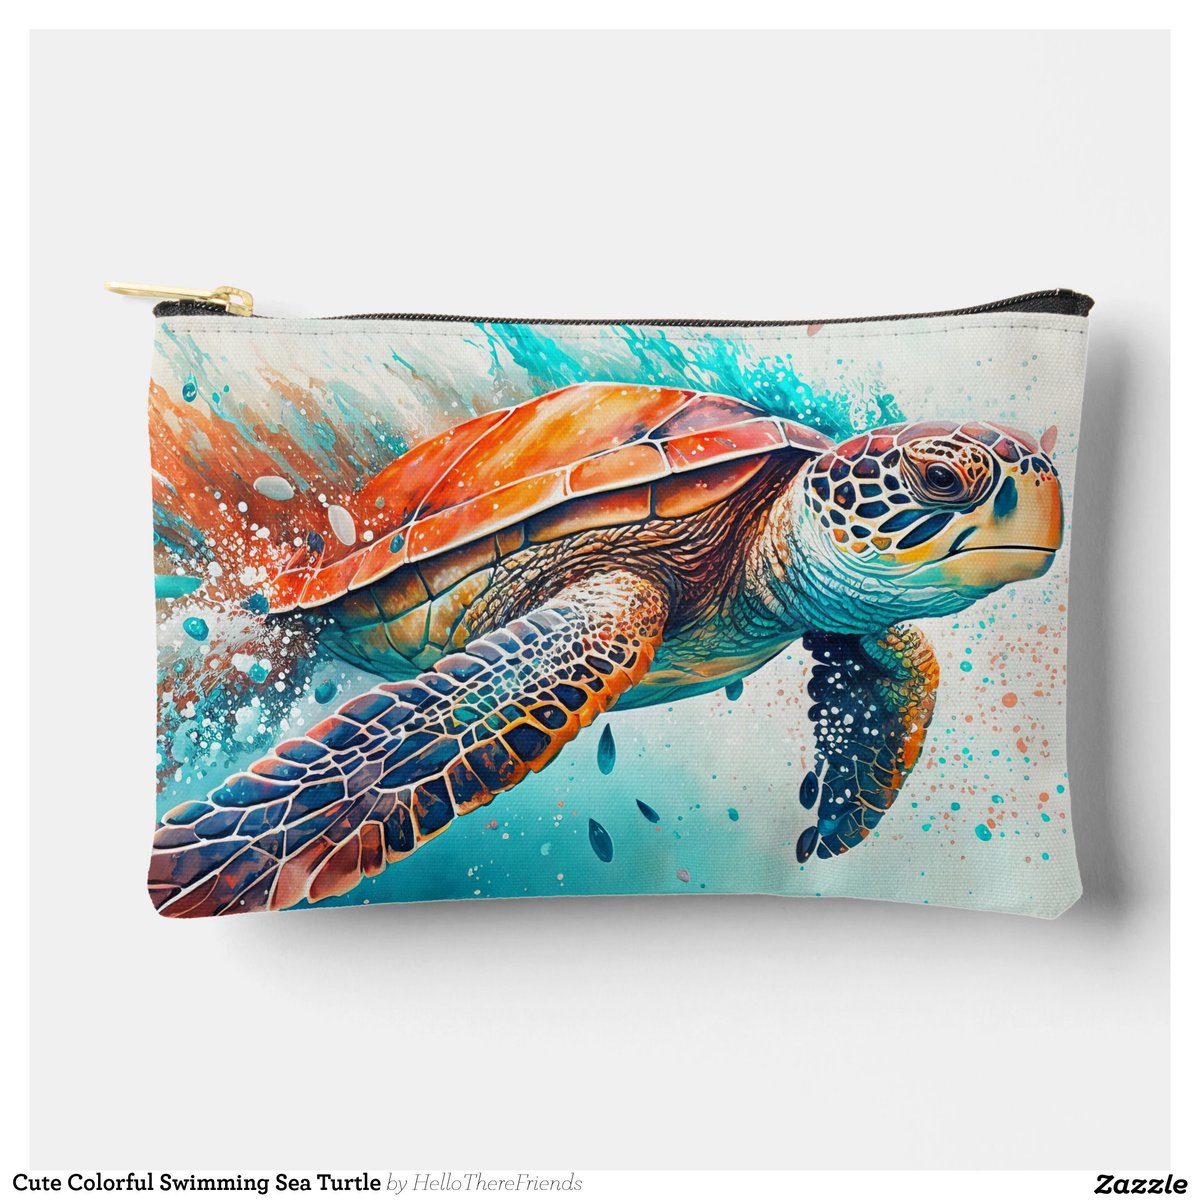 Cute Colorful Swimming Sea Turtle Accessory Pouch→zazzle.com/z/as29v6t2?rf=…

#MakeupBag #CosmeticBag #TravelBag #Handbag #Accessories #MothersDay #GiftIdeas #Birthdays #Gifts